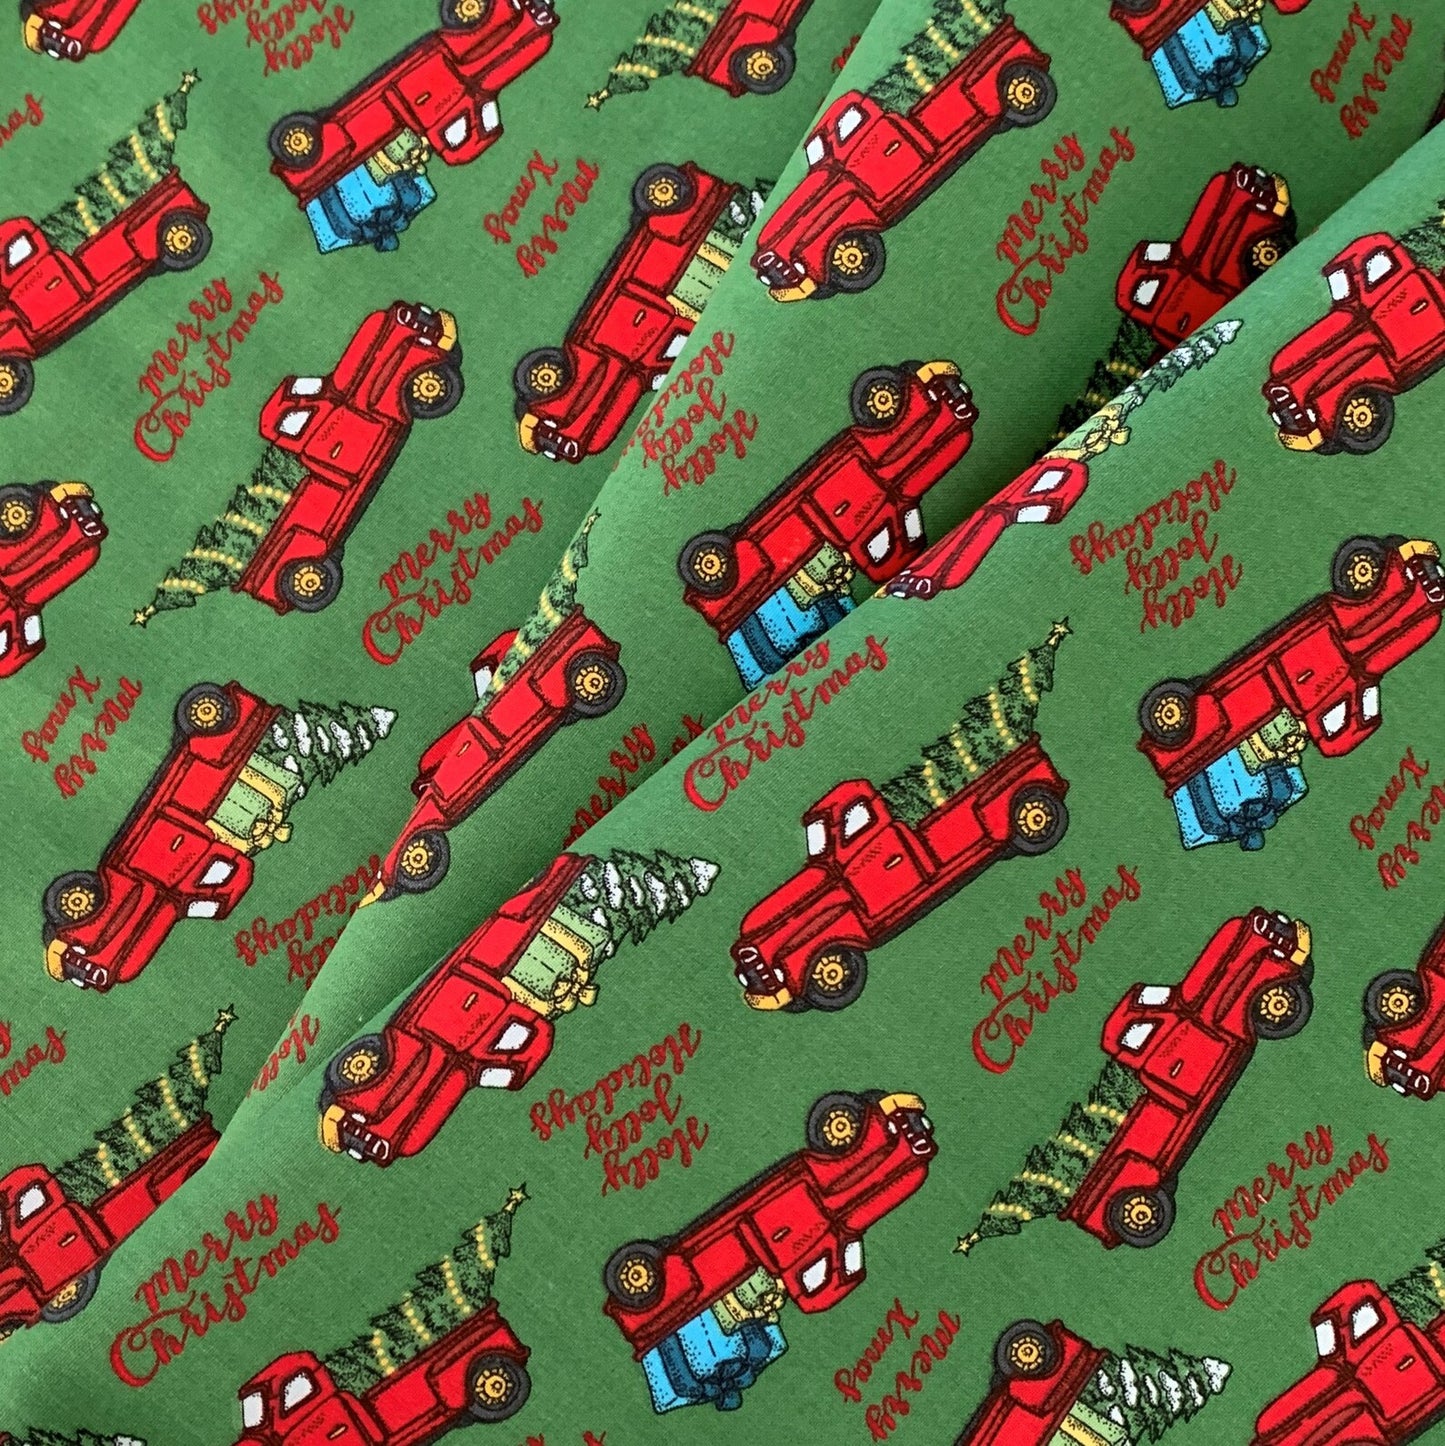 45 x 36 Christmas Red Truck Gifts Trees on Green 100% Cotton Fabric